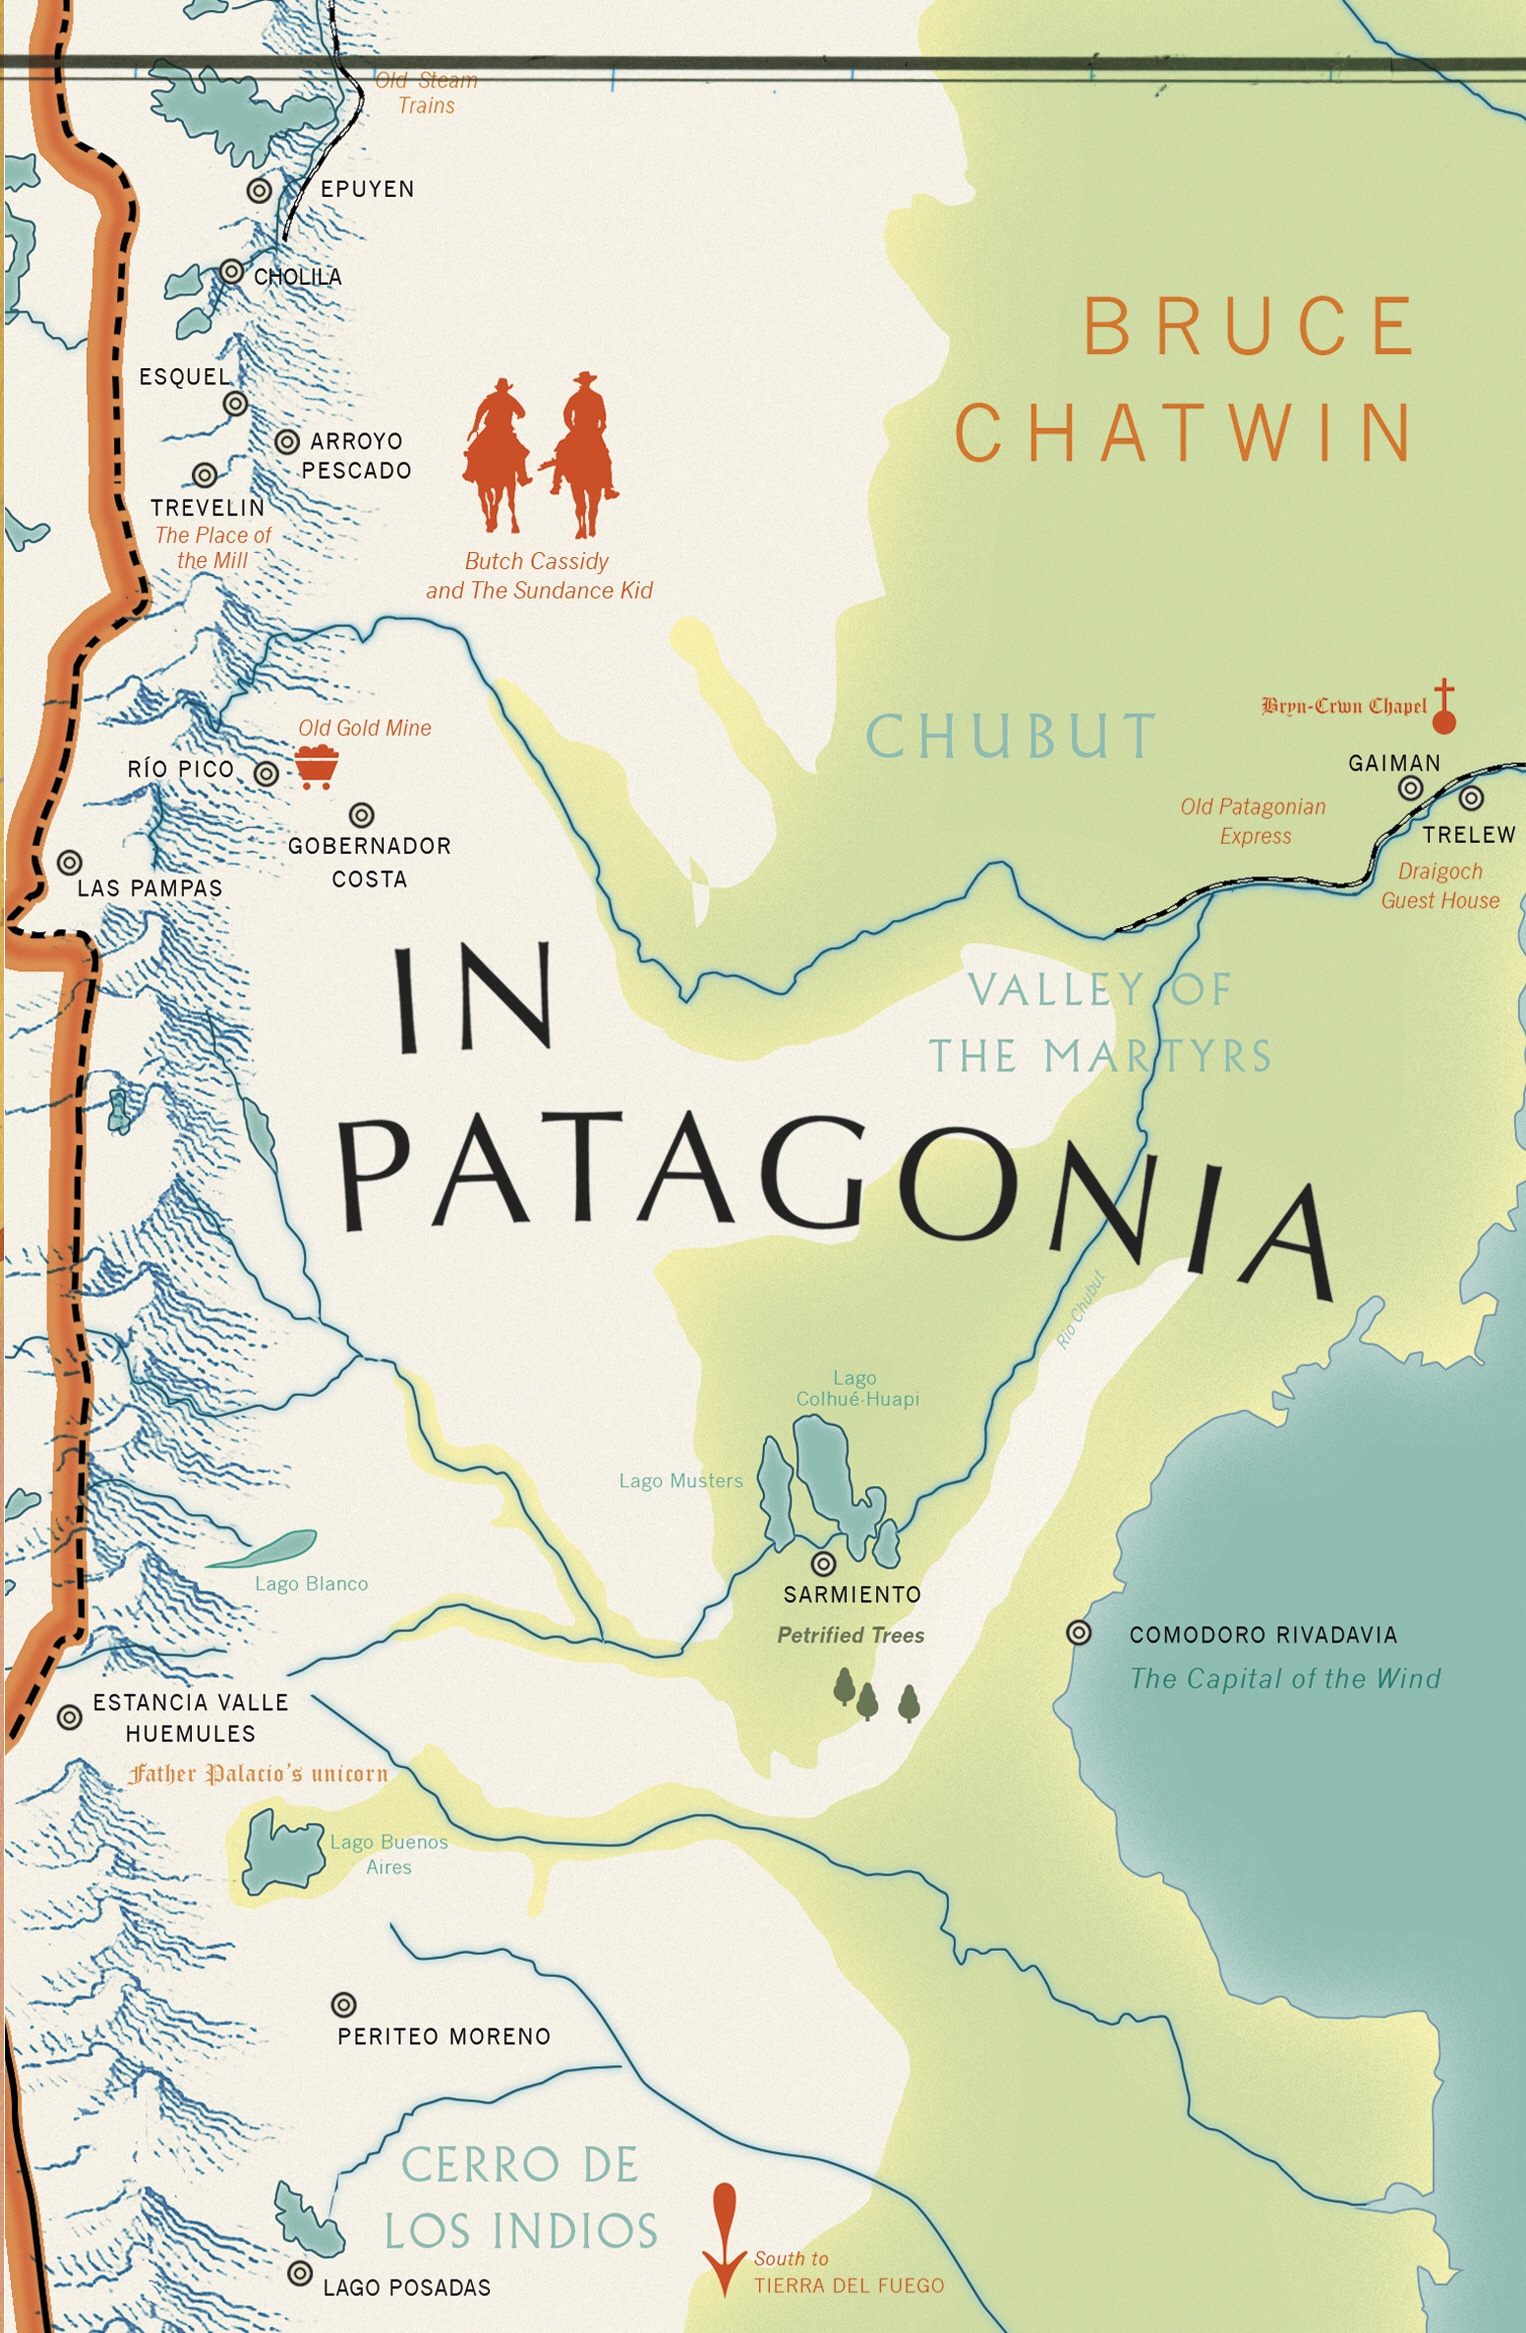 Book “In Patagonia” by Bruce Chatwin — June 6, 2019